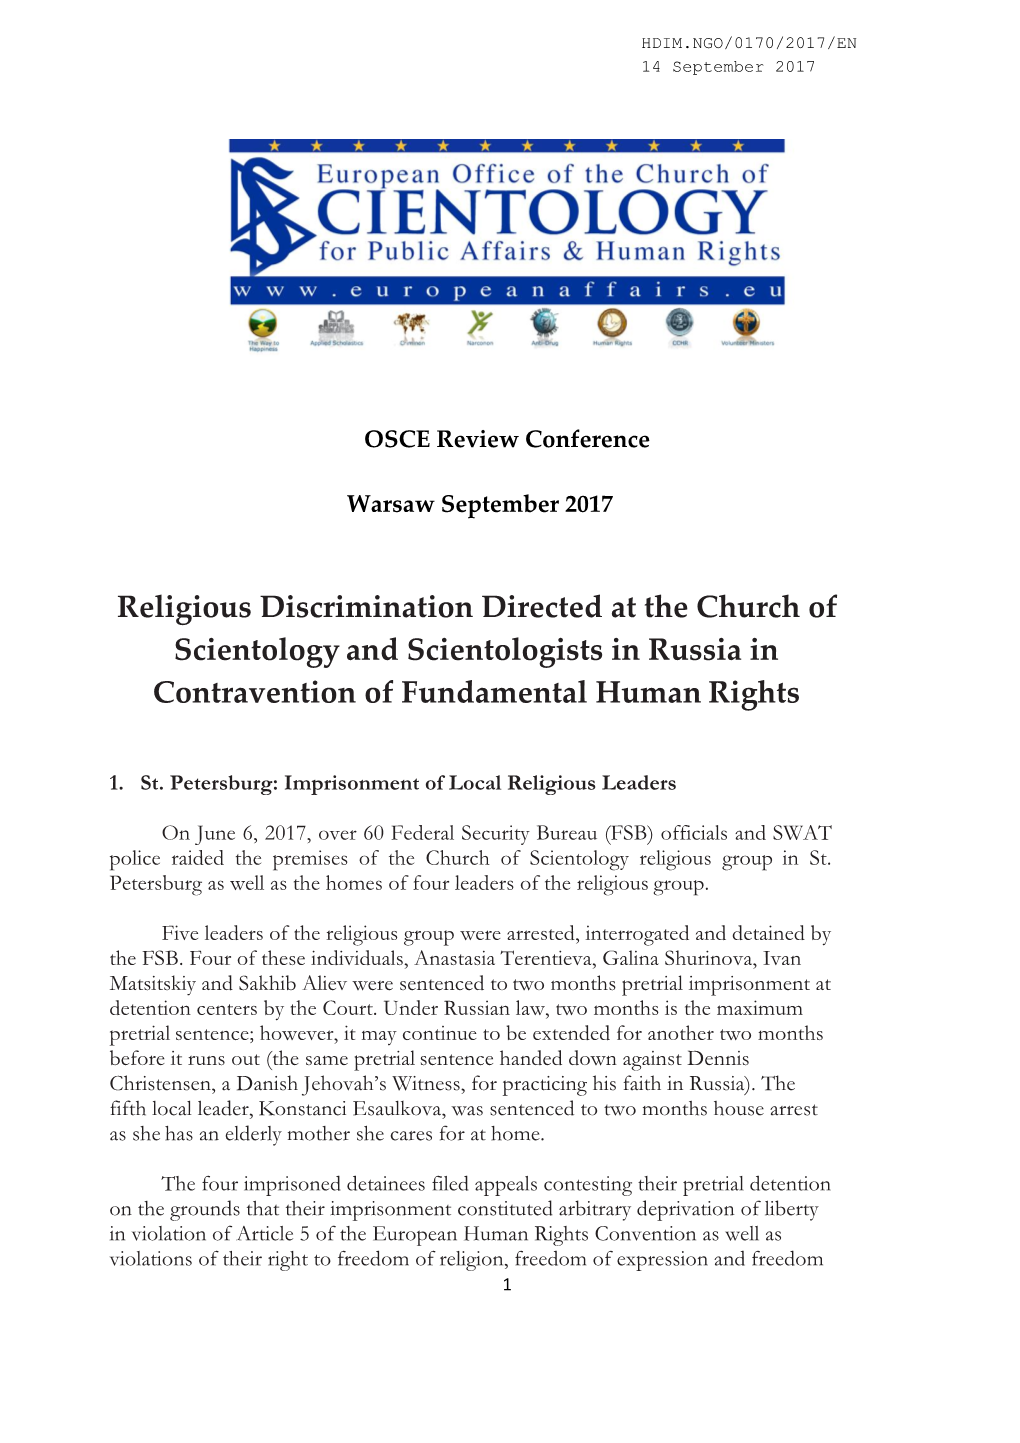 Religious Discrimination Directed at the Church of Scientology and Scientologists in Russia in Contravention of Fundamental Human Rights